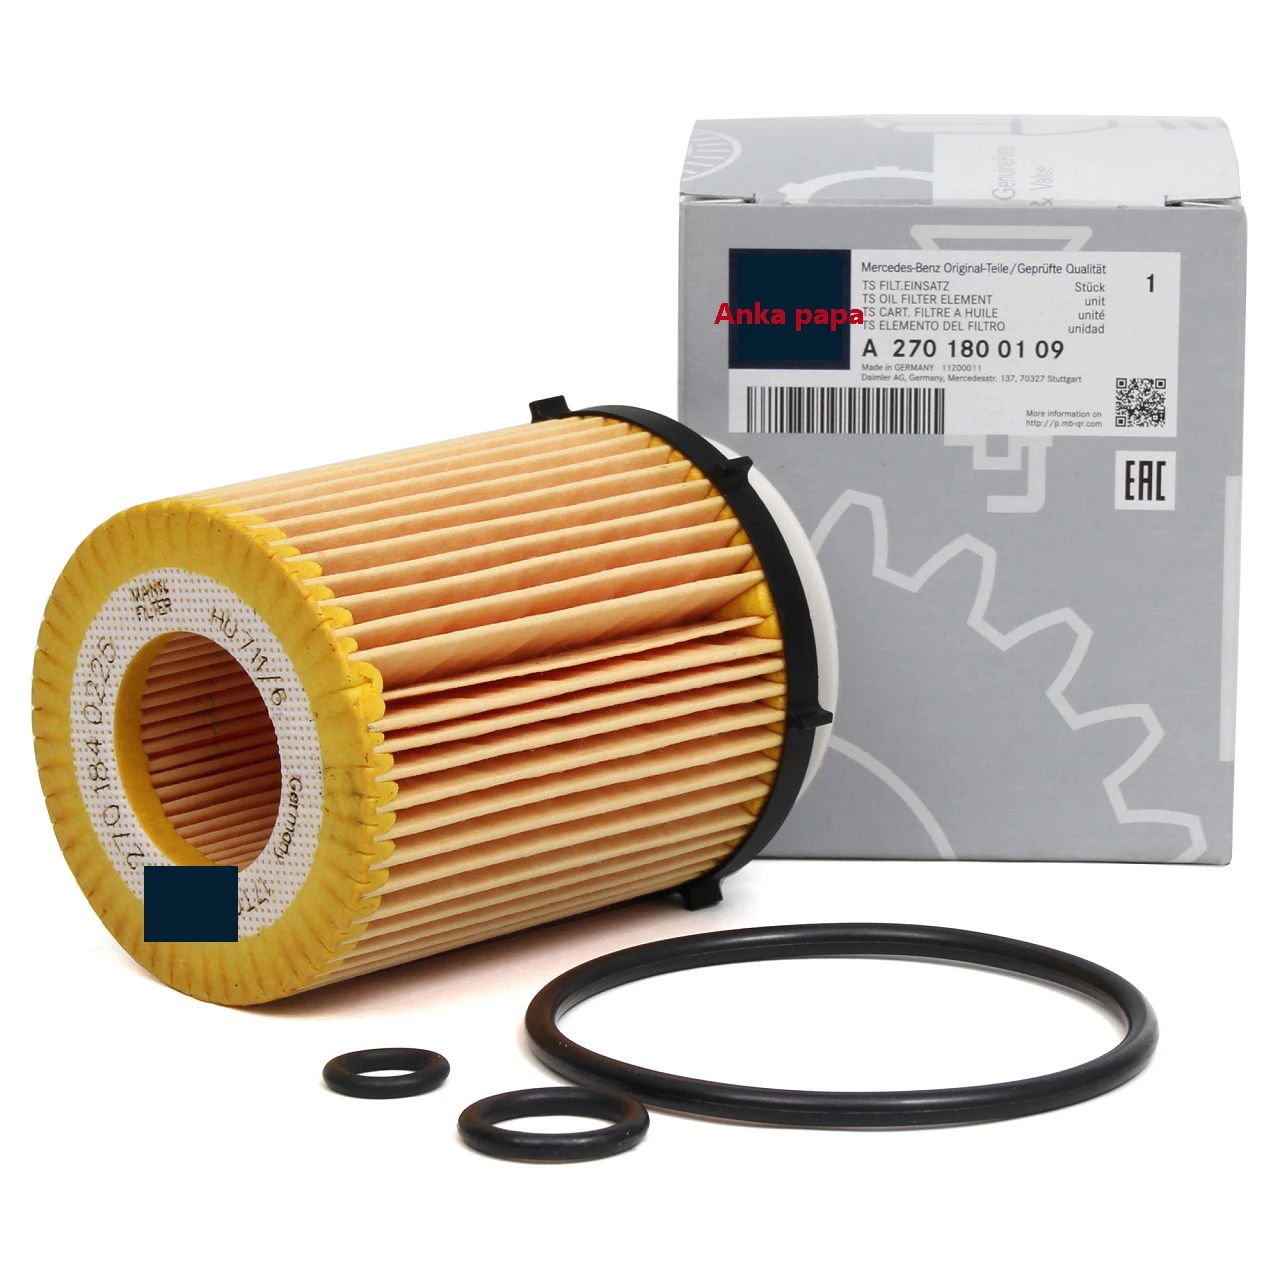 OE quality Engine Oil Filter for CLA250 engine I4 2.0L 270.920 2701800109 - $66.50